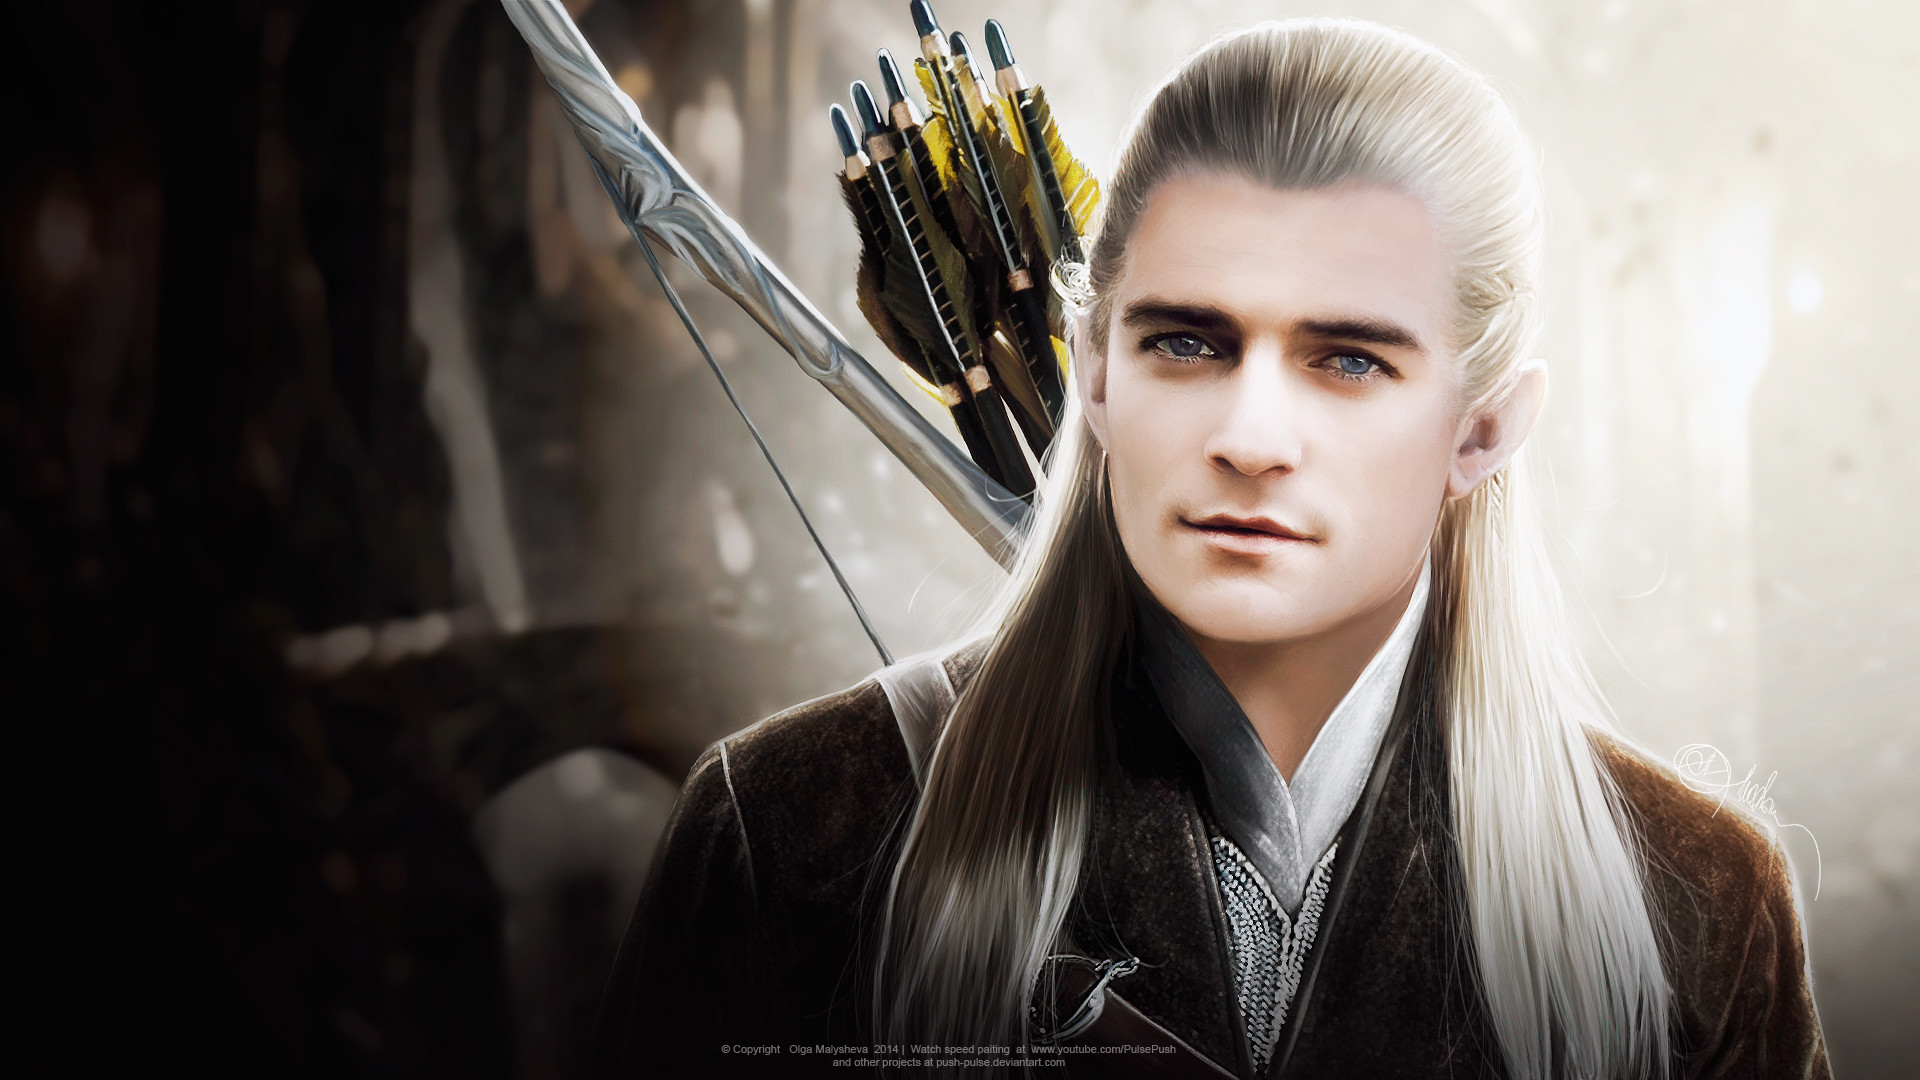 Download Legolas wallpapers for mobile phone free Legolas HD pictures